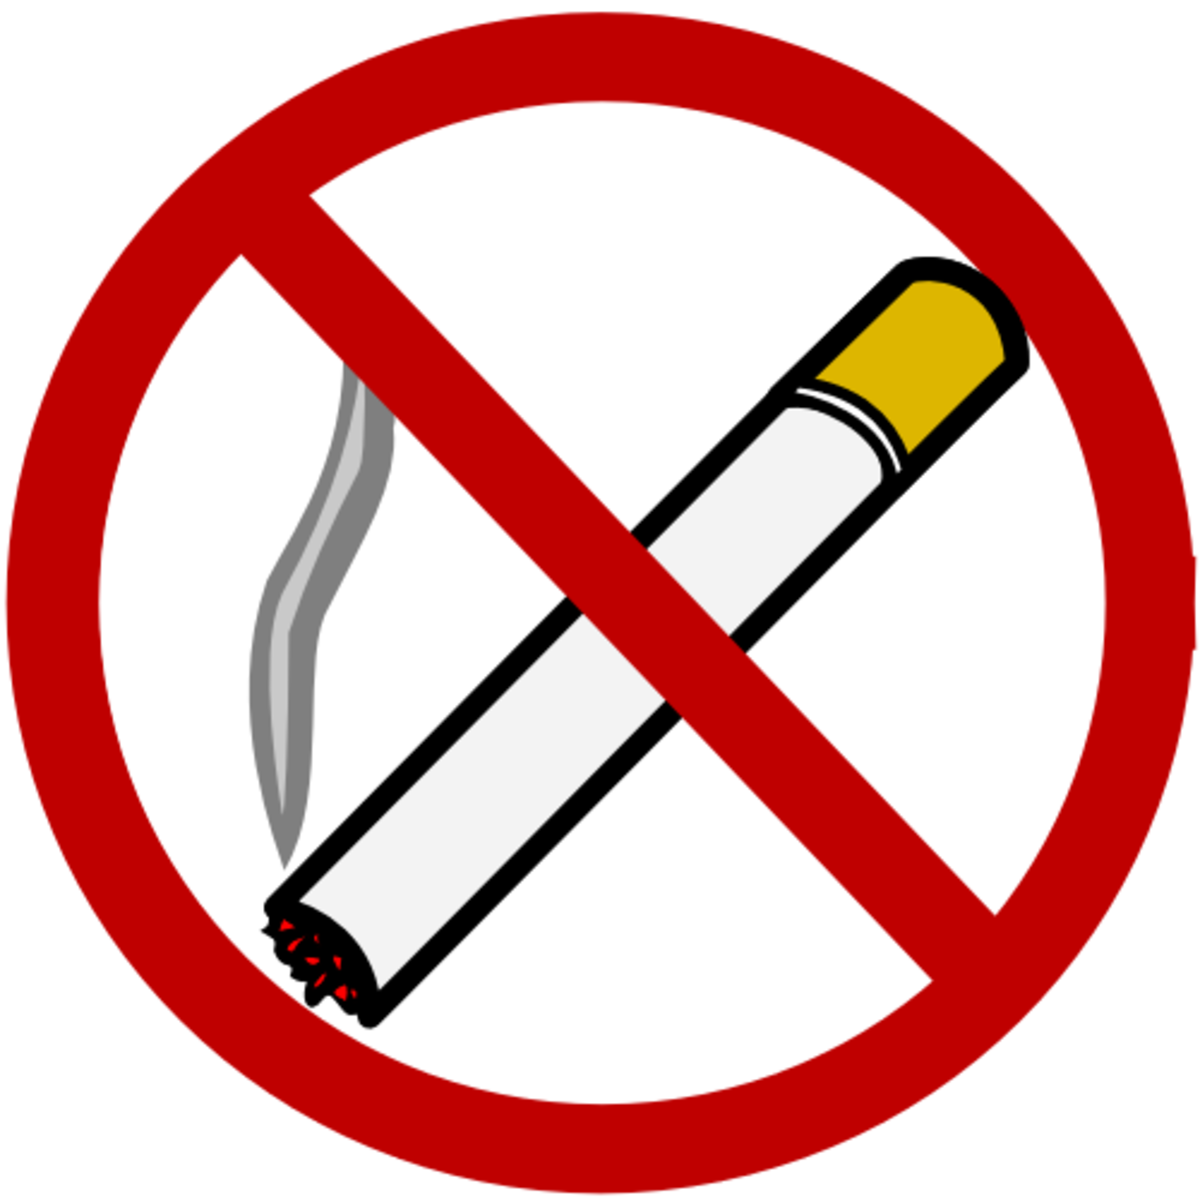 Should Cigarette Smoking Be Banned